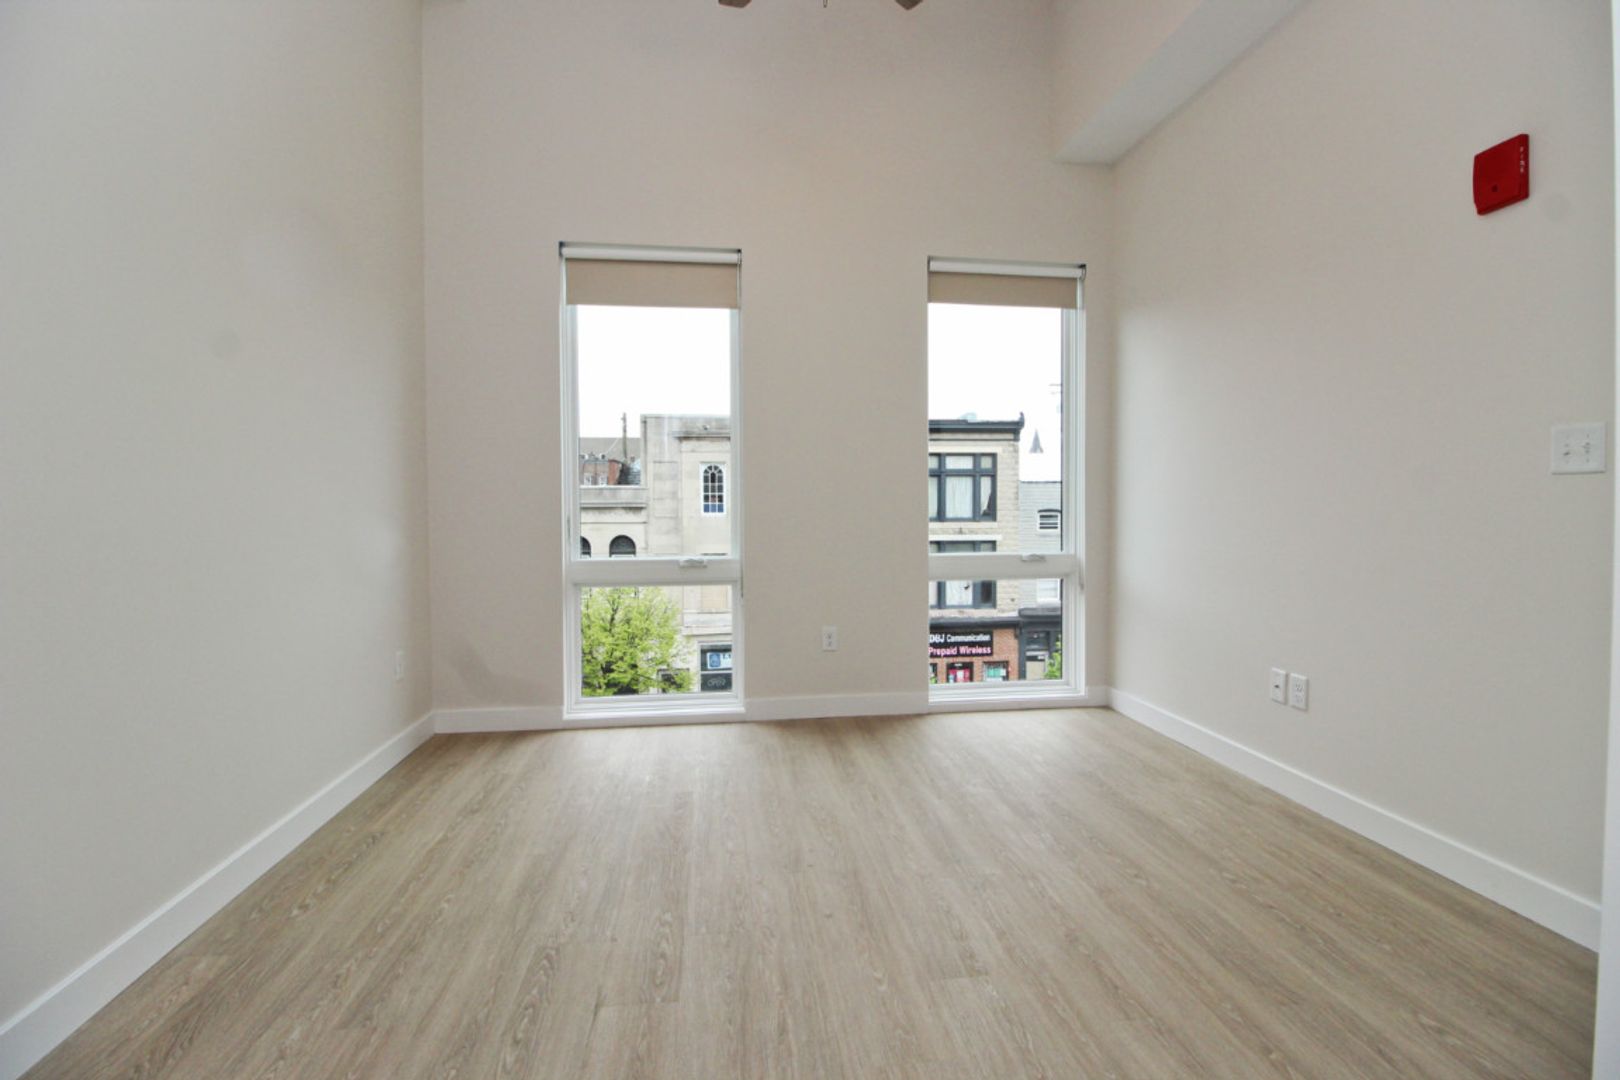 For Rent: Urban Elegance at 1707 Eastern Ave– Your Ideal City Lifestyle Awaits!